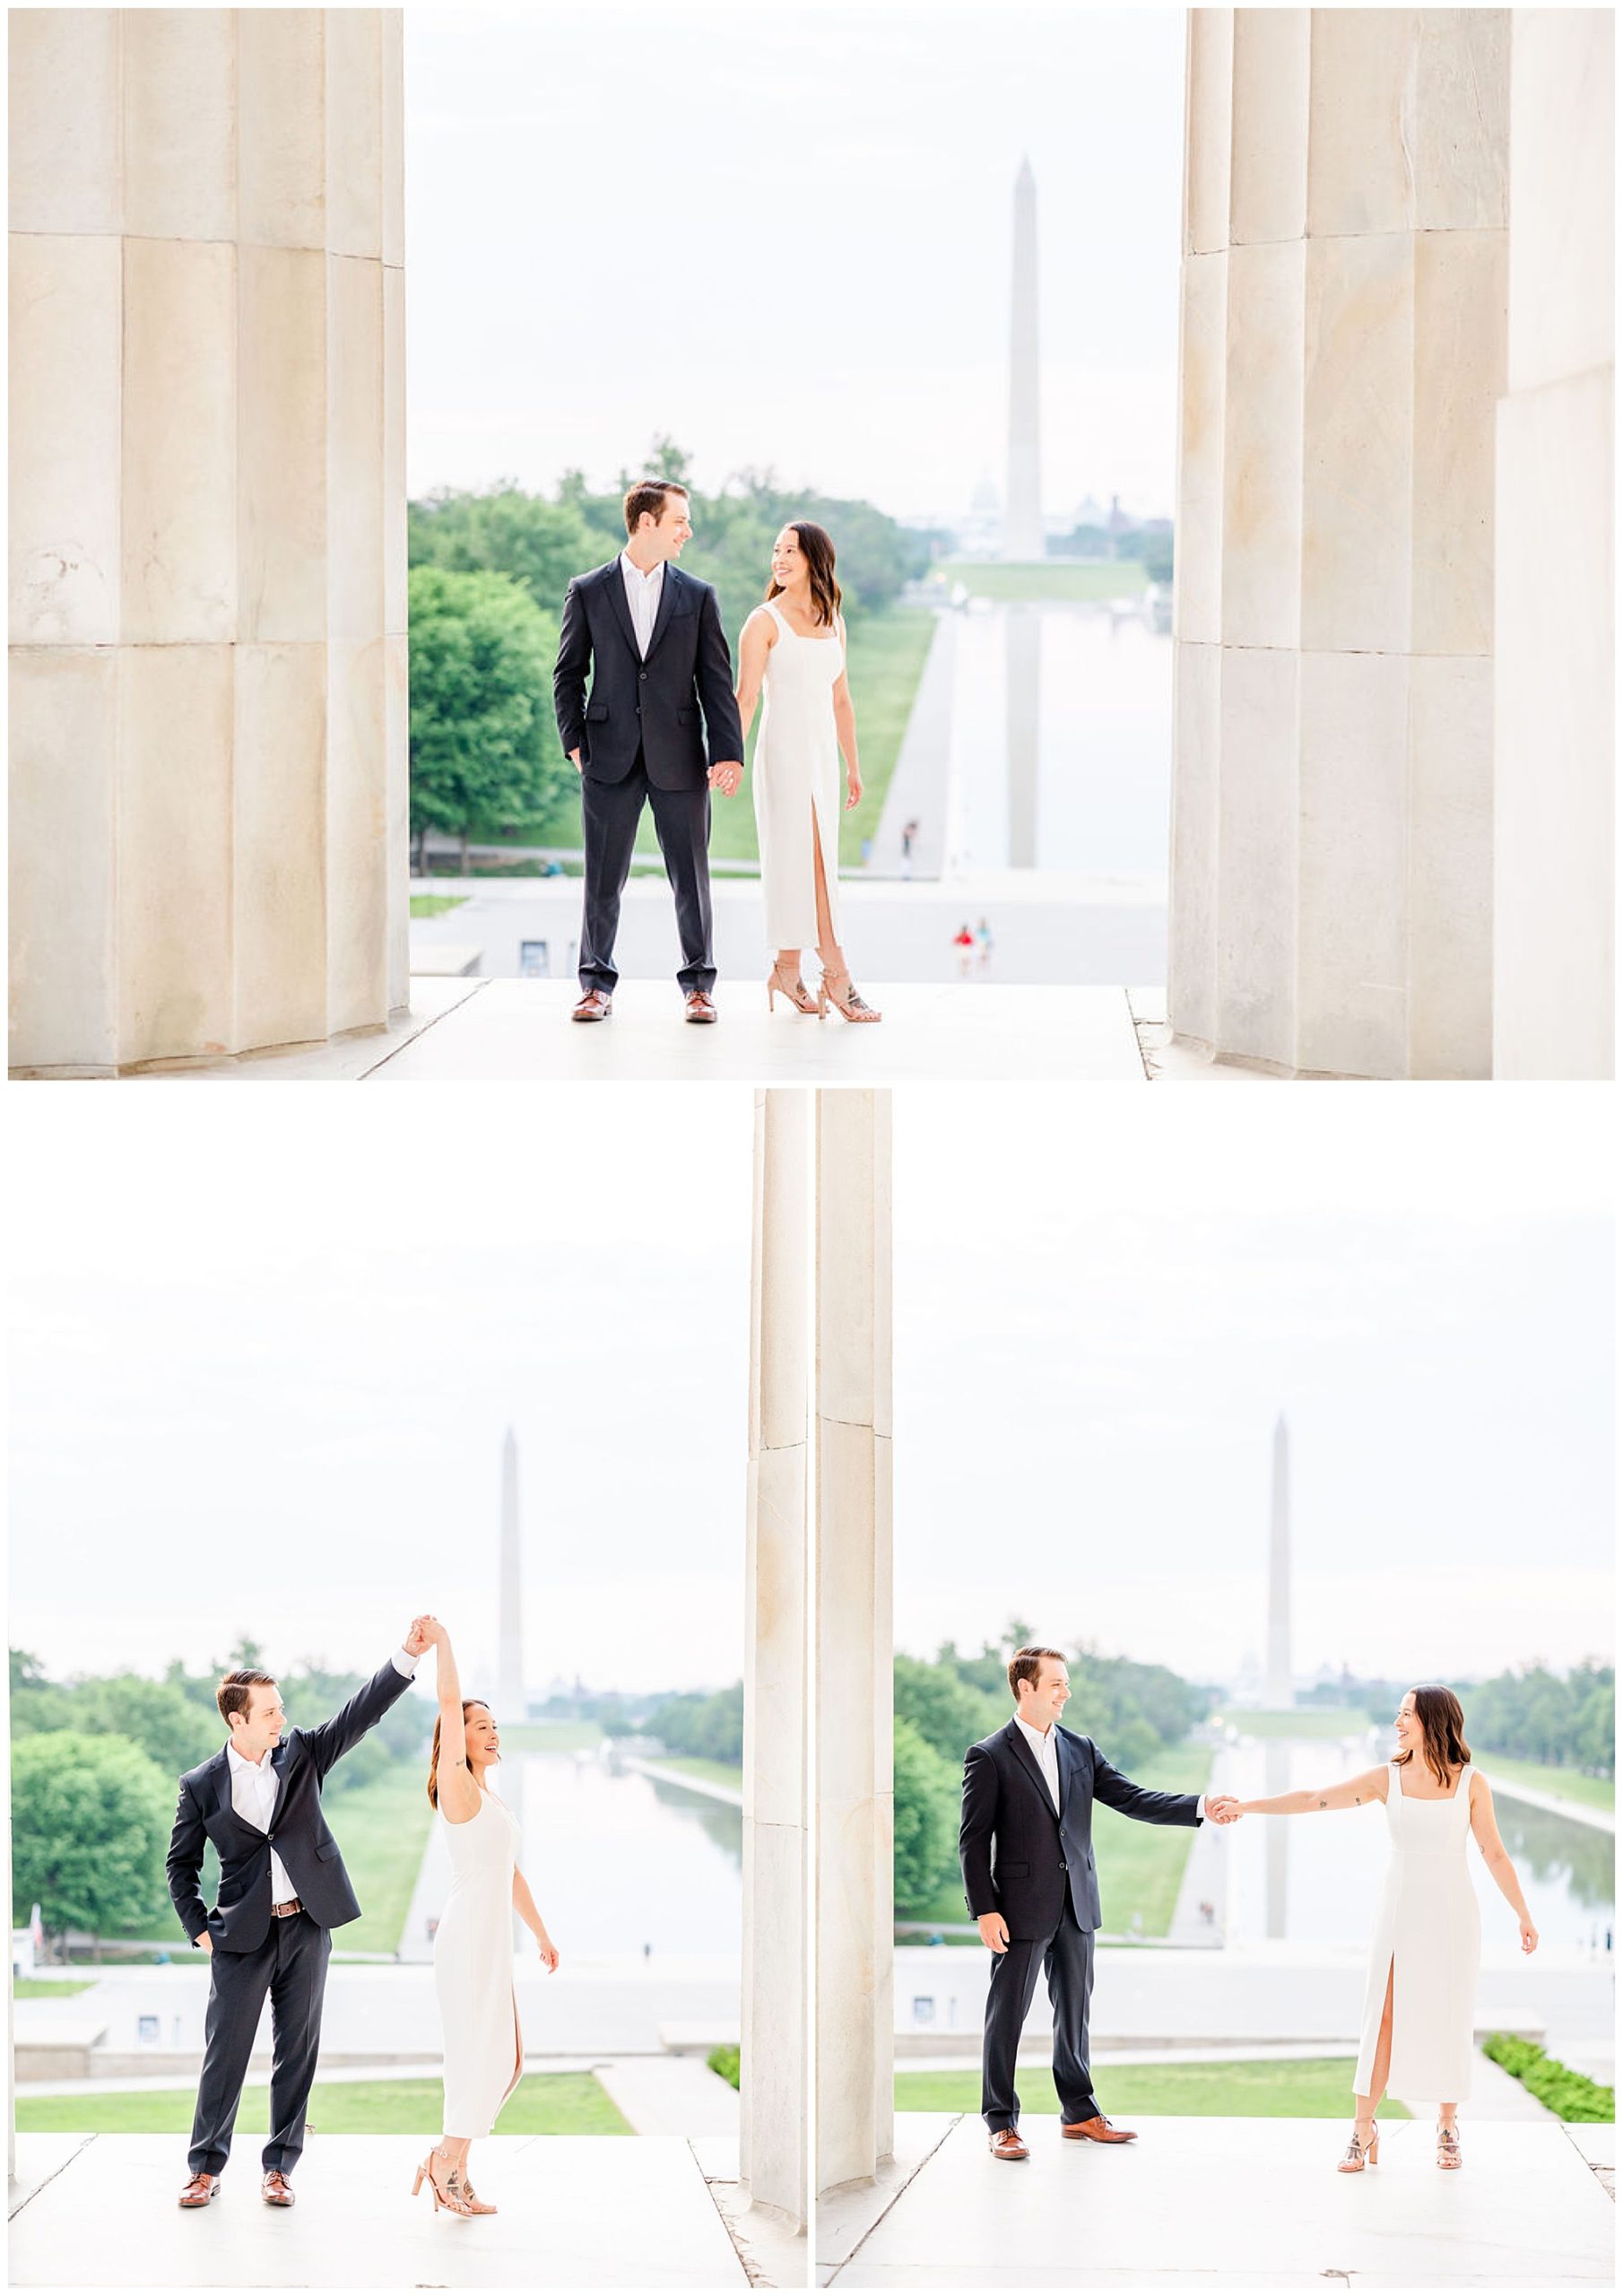 pink sunrise Lincoln Memorial engagement, DC engagement session, DC engagement photographer, formal DC engagement photos, DC elopement photographer, DC wedding photographer, classic DC engagement photos, luxury DC engagement photographer, Rachel E.H. Photography, man twirling woman, couple looking at each other